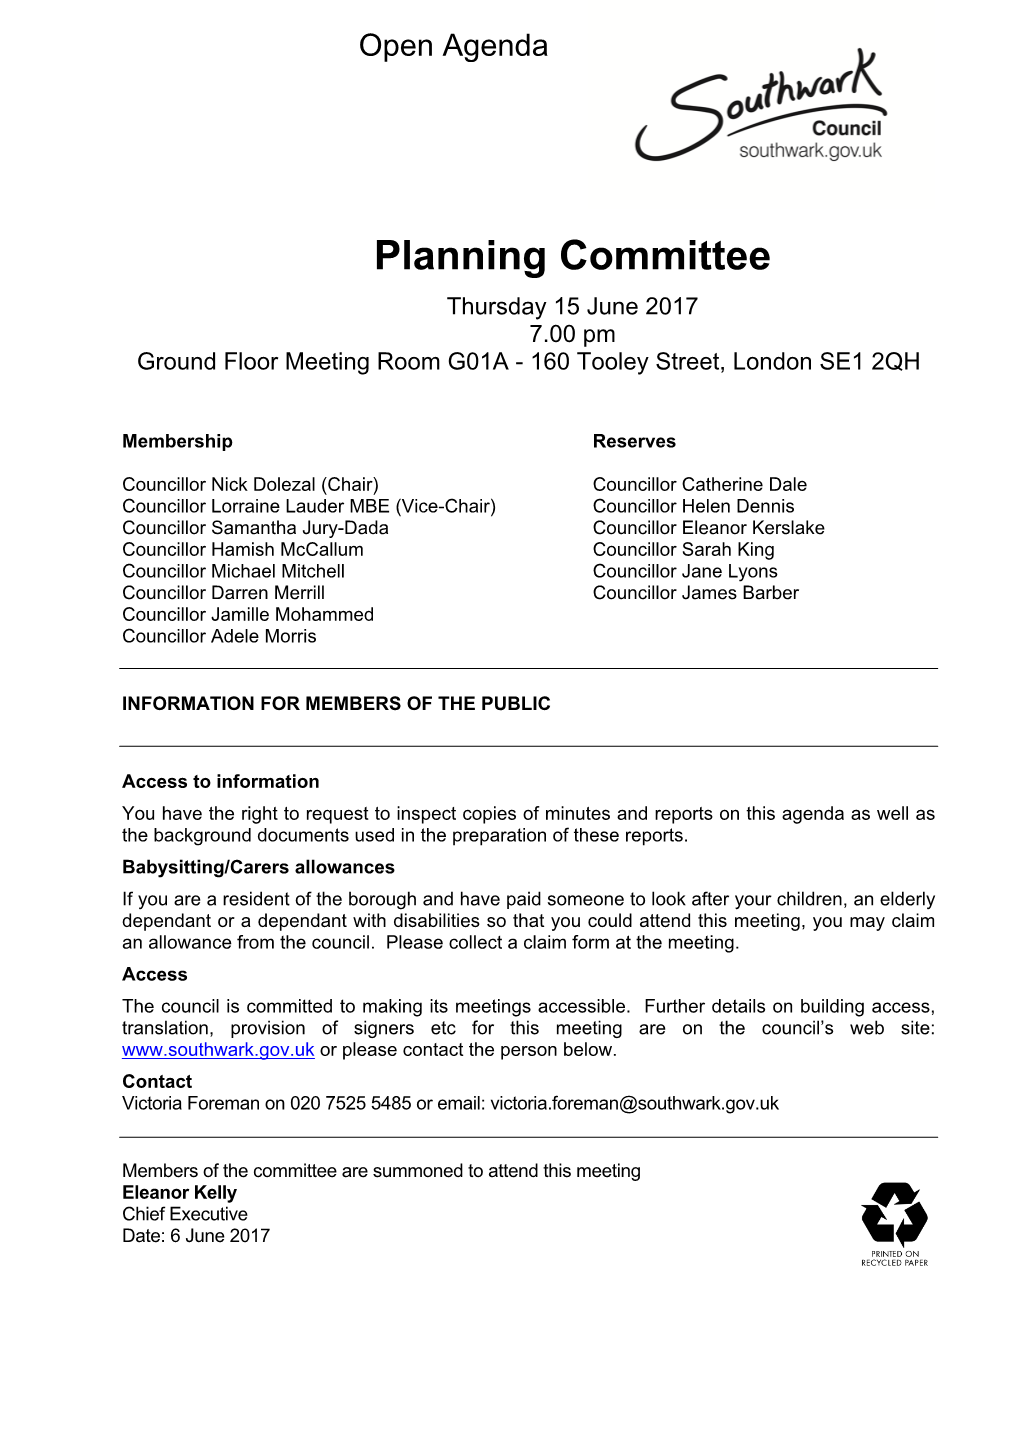 (Public Pack)Agenda Document for Planning Committee, 15/06/2017